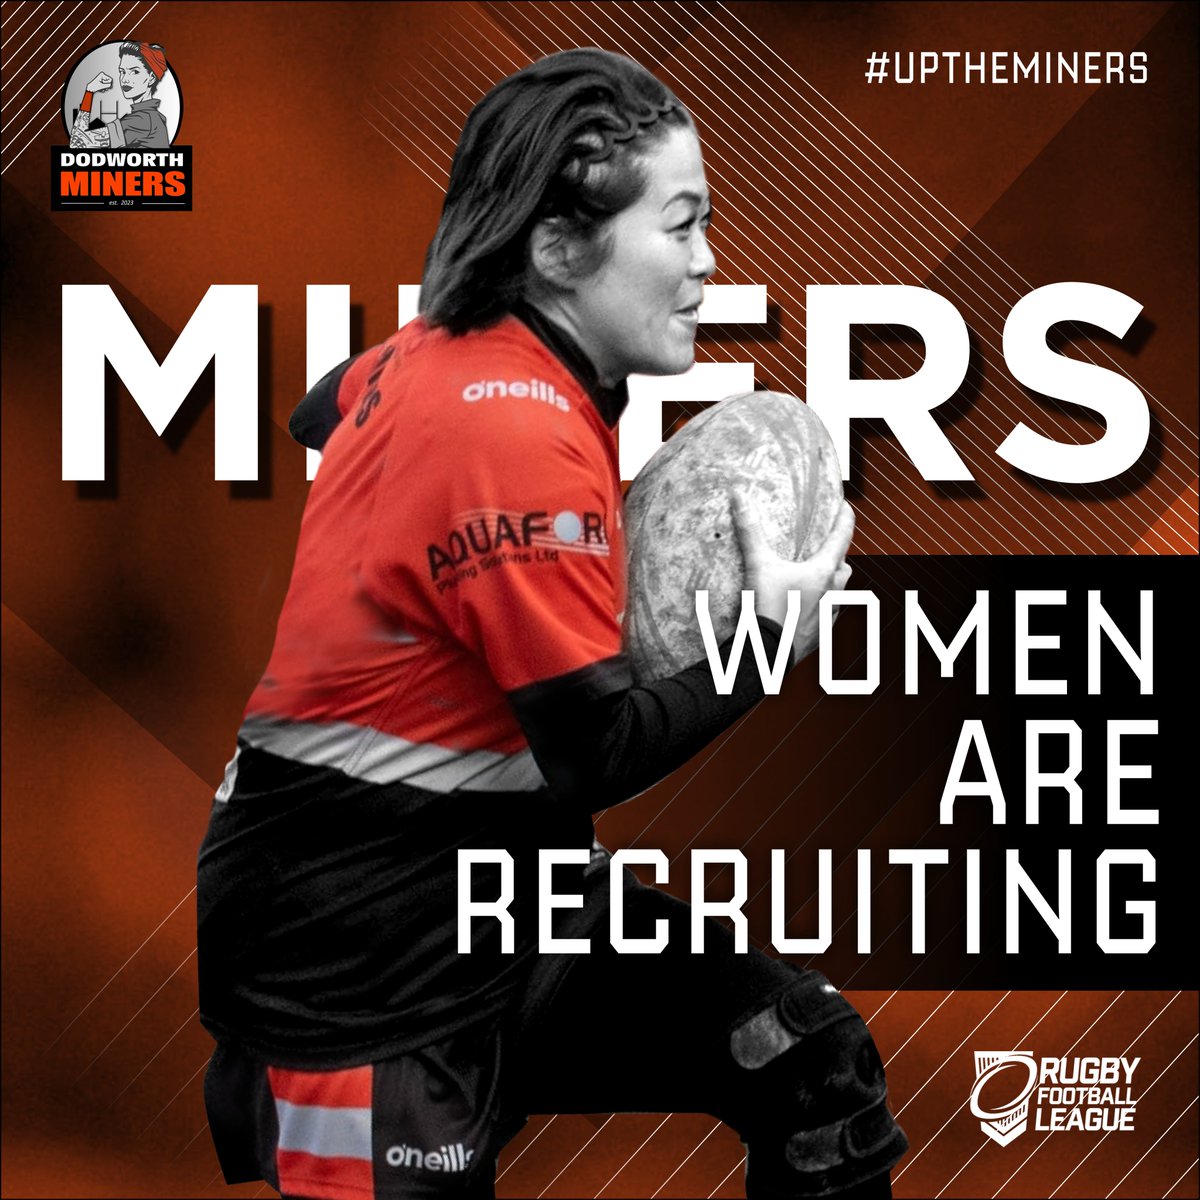 Rugby League Training
We welcome all women 17+ to join our team

Training Wednesday 7:00pm - 8:30pm.

Dodworth, Barnsley, S75 3RF

For any more info, 
Joe: 07764 467624. Luke: 07460 878609.
#womensrugbyleague #thisgirlcan #rugbyleague #barnsleyisbrill #womensports #dodworth